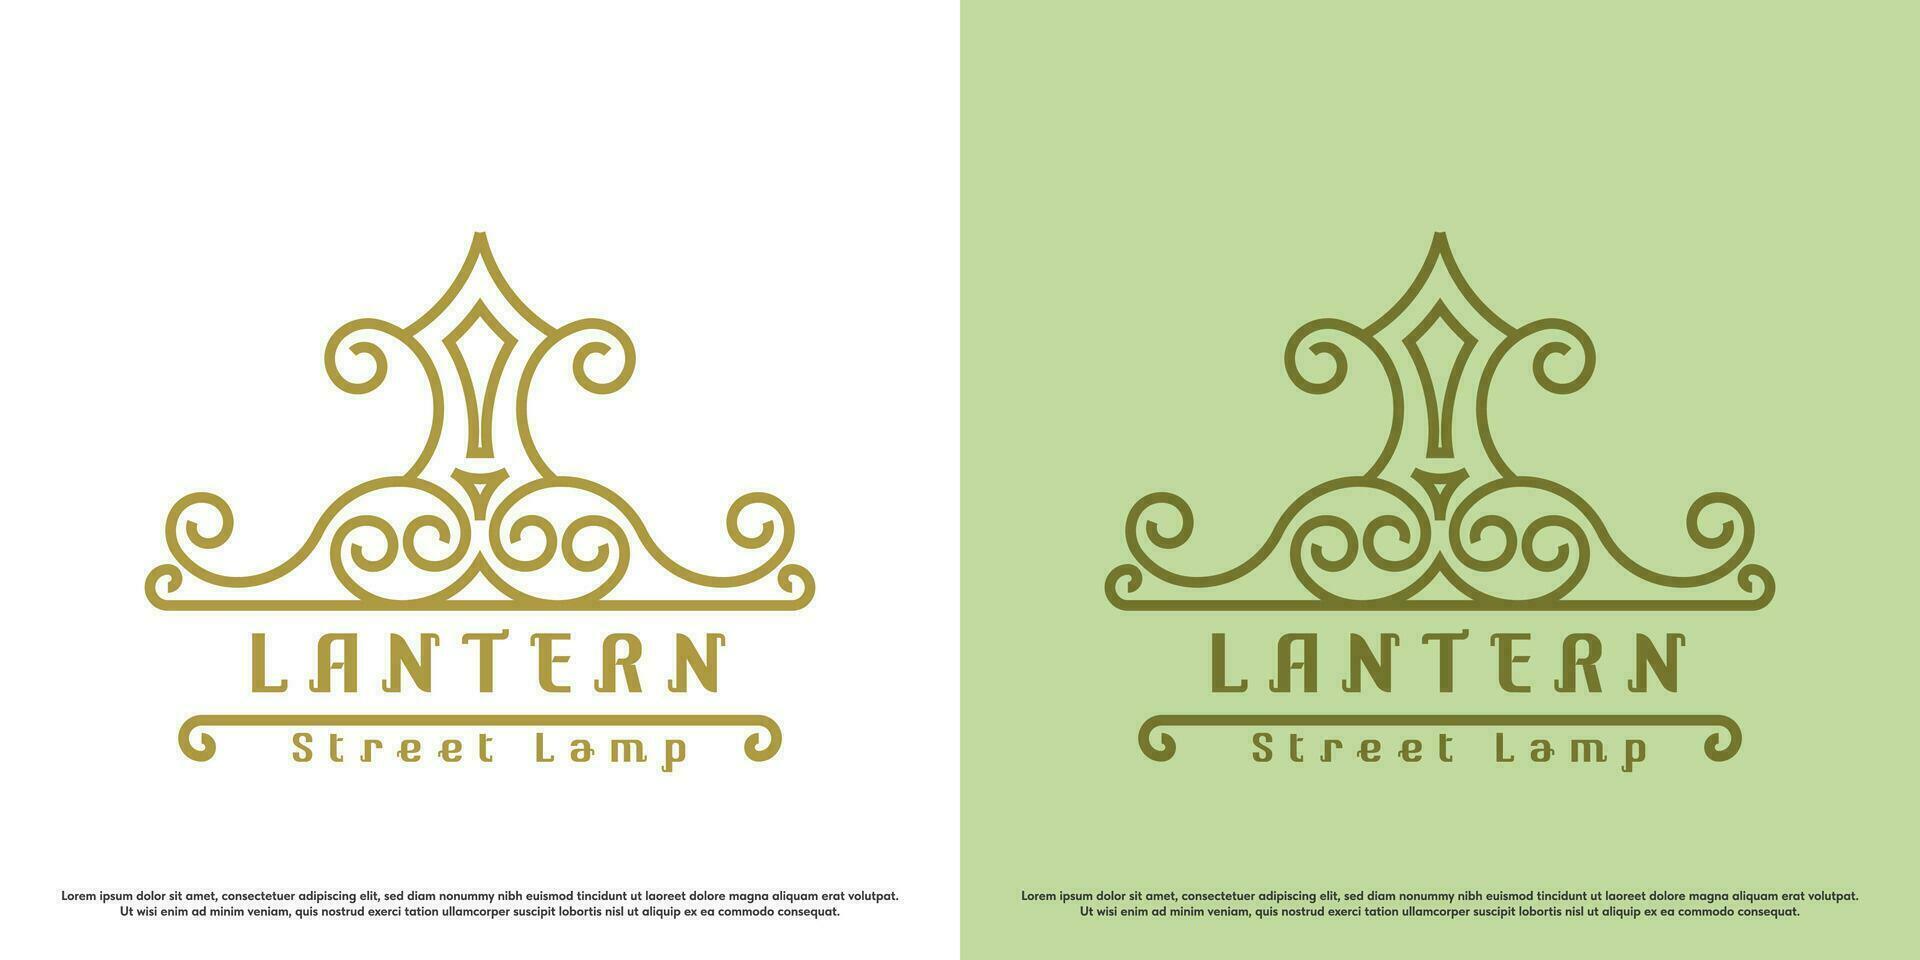 Street light logo design illustration. Abstract linear art line city lights building lantern pole post decoration. Simple style icon symbol classic medieval victorian gothic luxury essential crest. vector